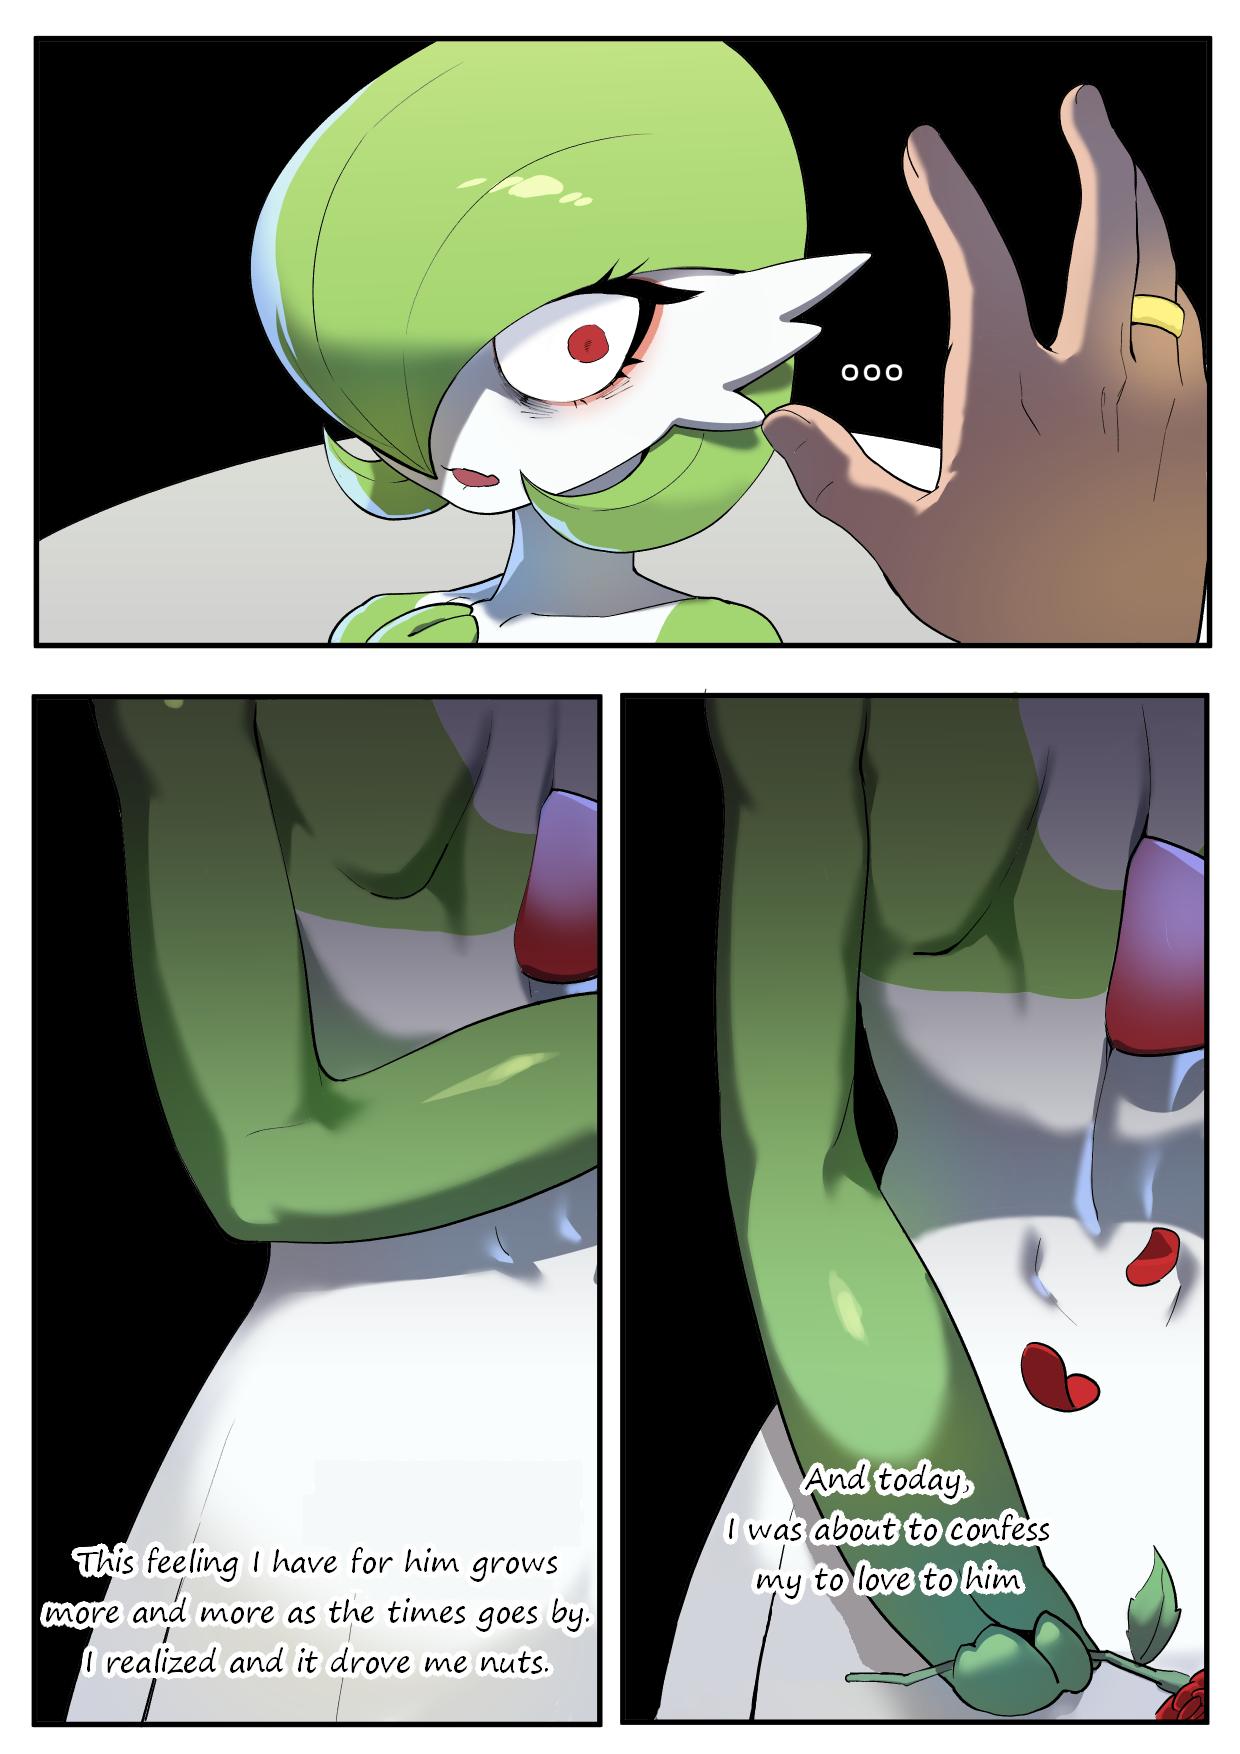 Bedroom The Gardevior that loved her trainer too much - Pokemon | pocket monsters Bed - Page 2